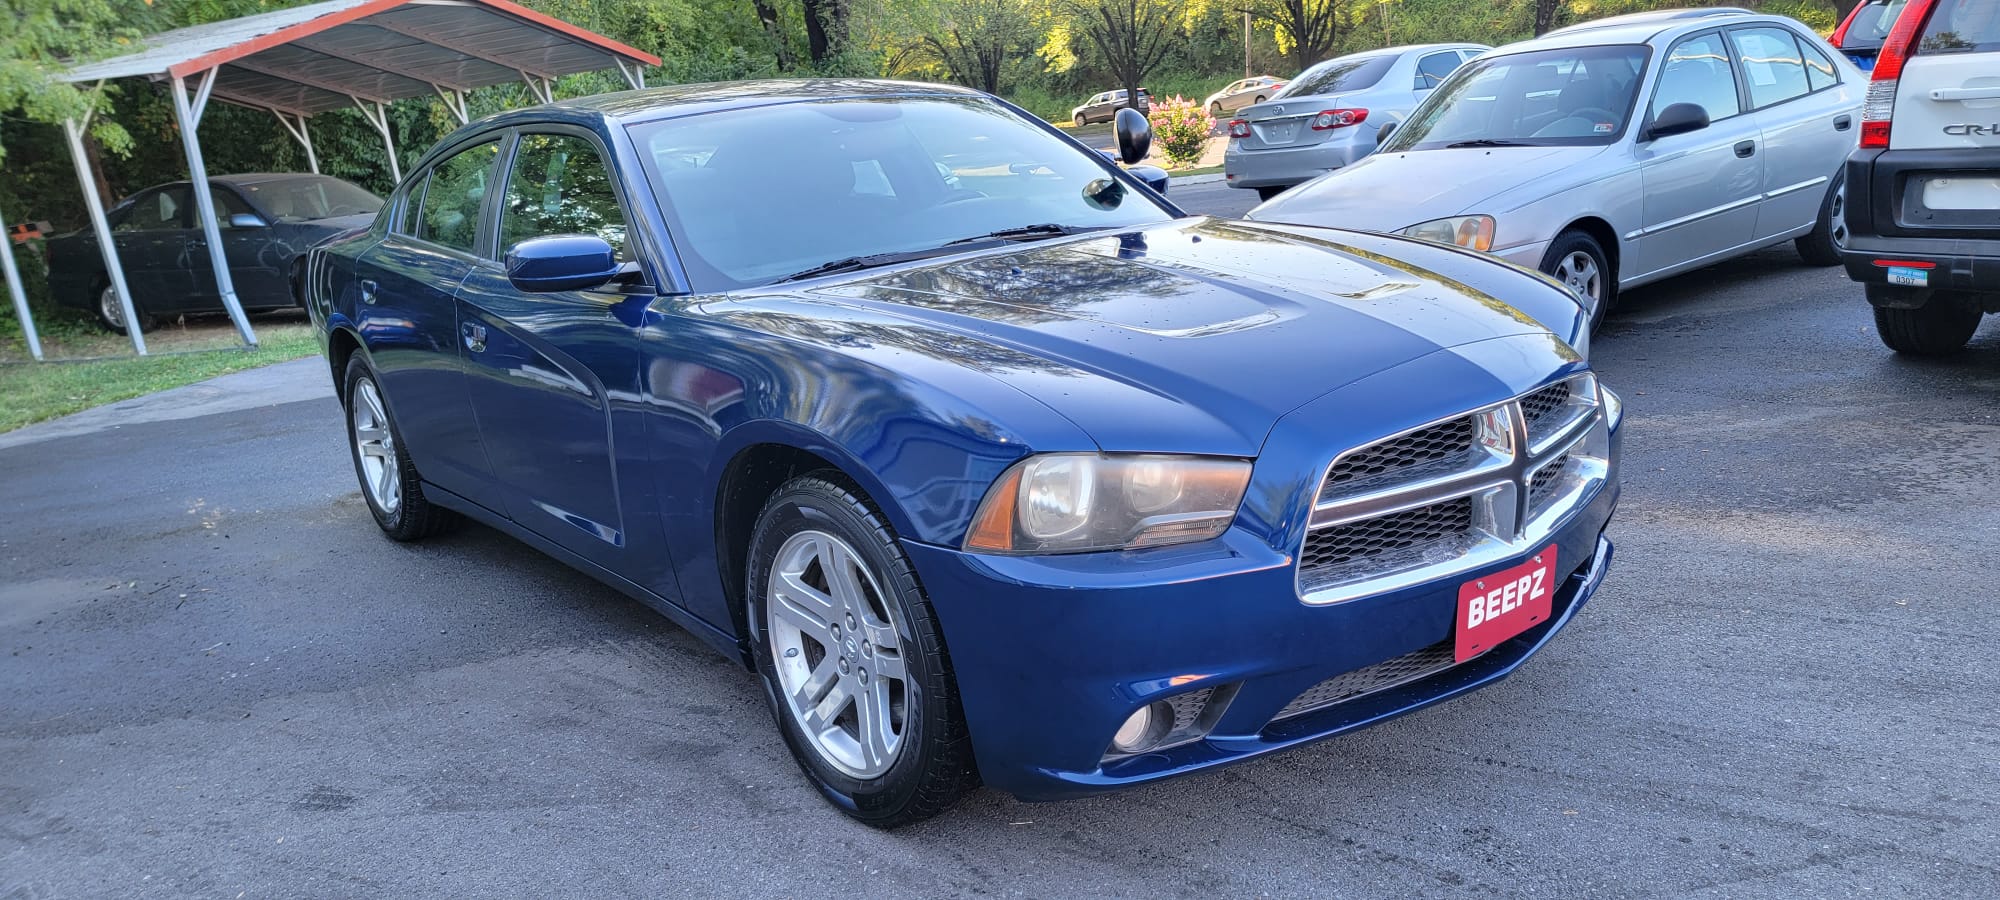 2013 Dodge Charger full